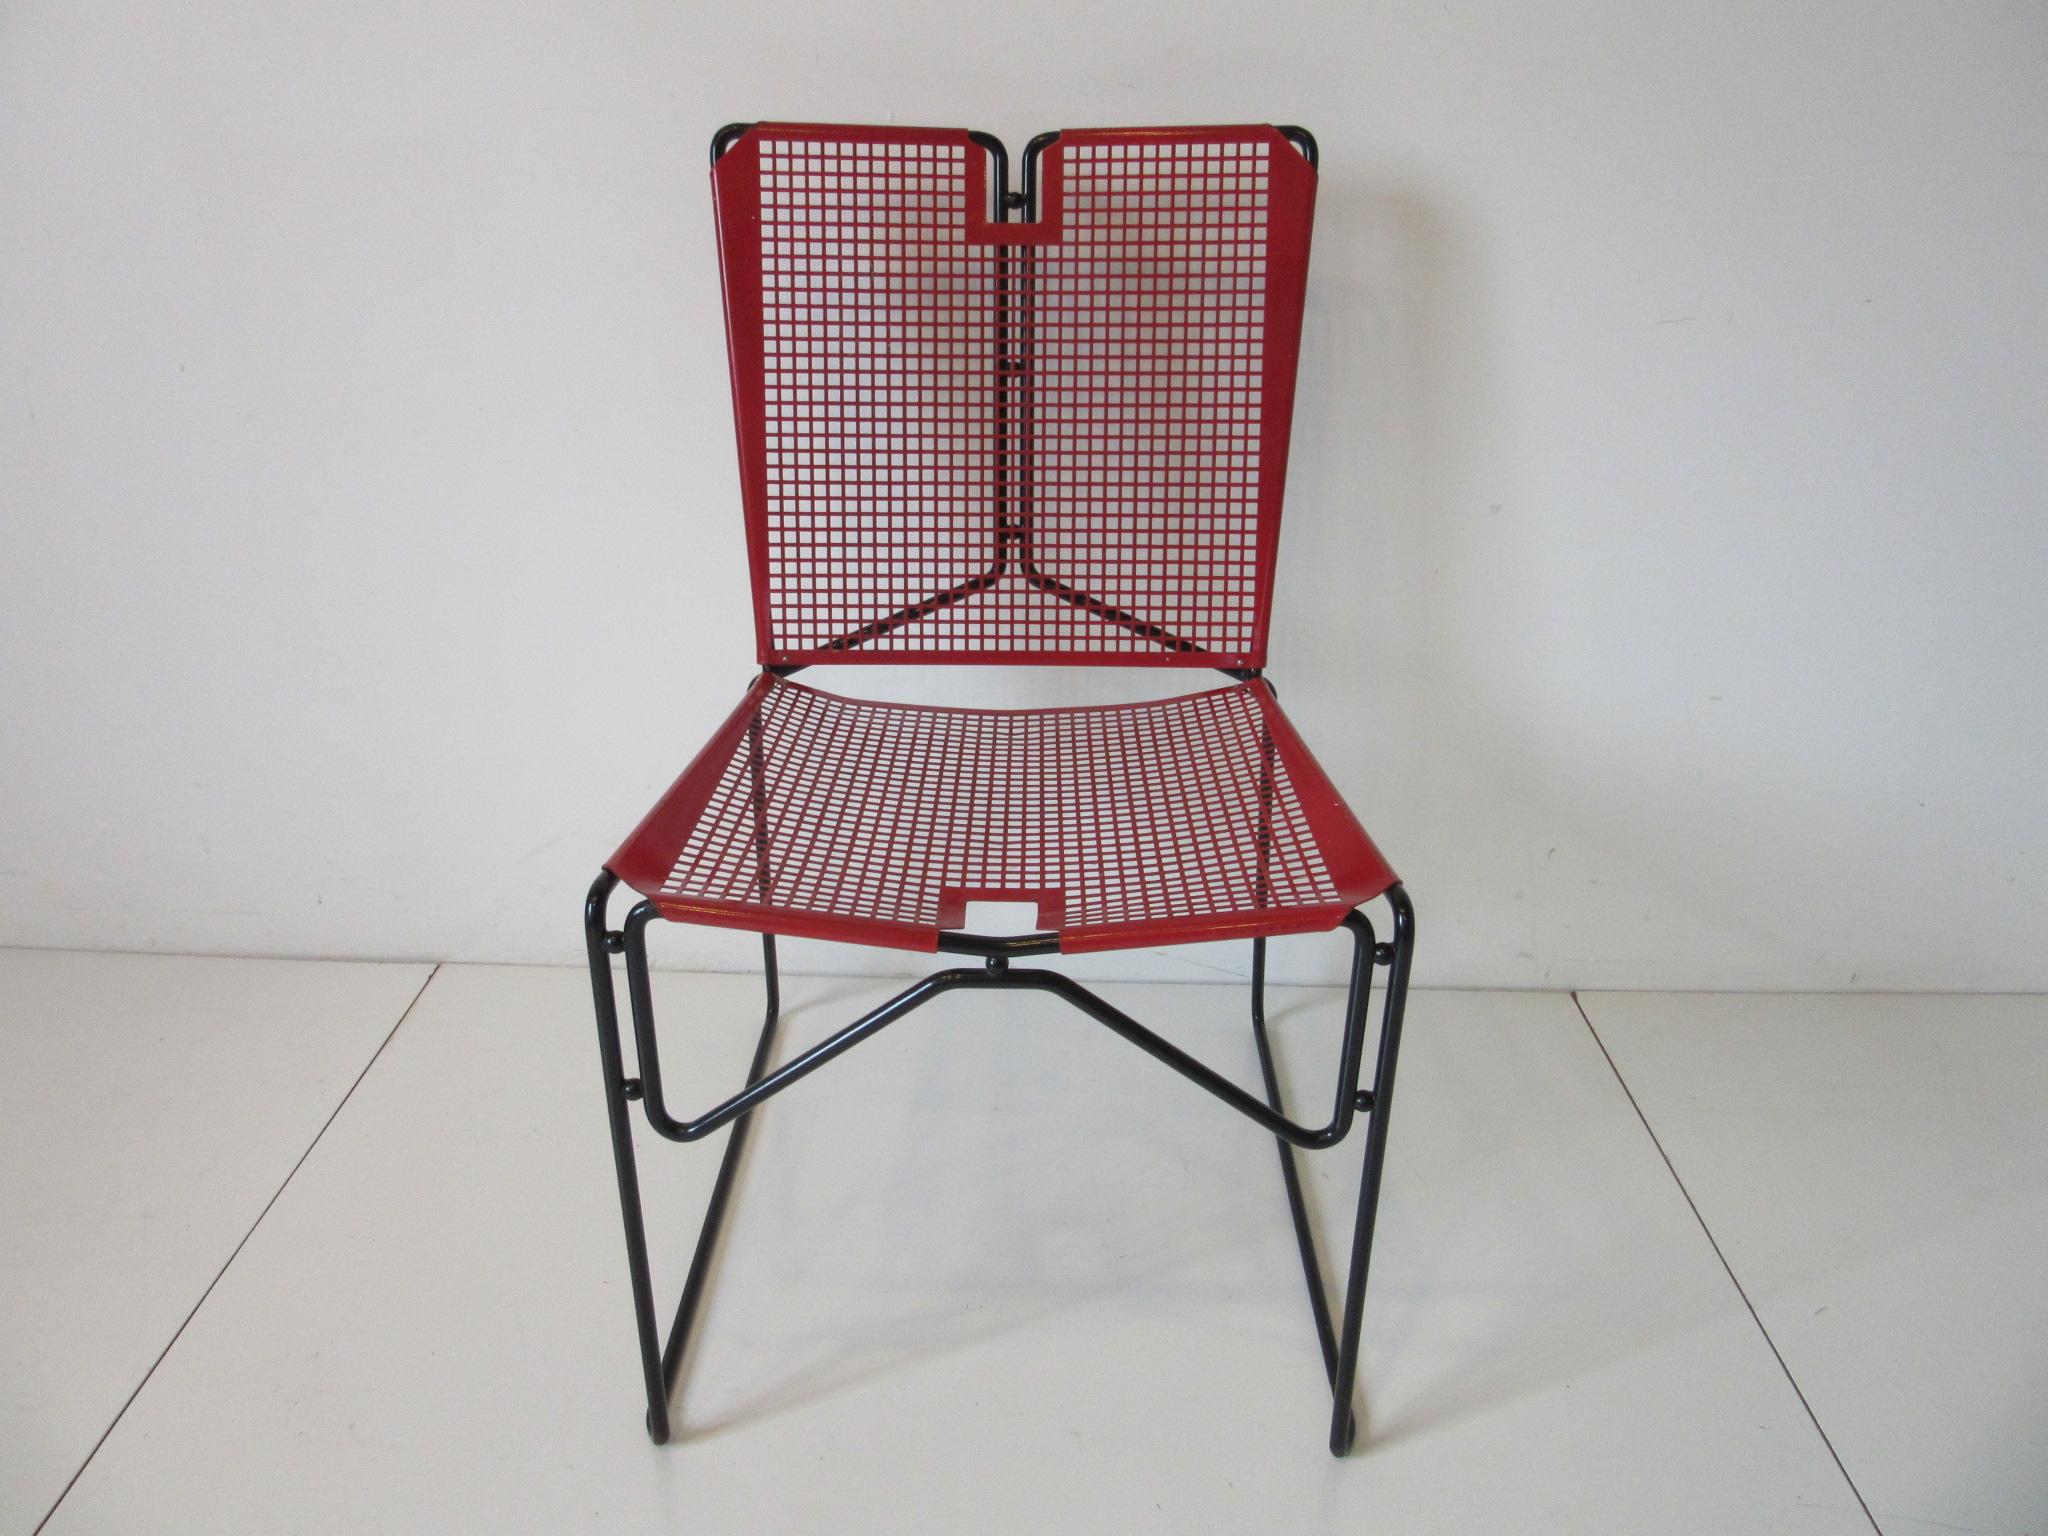 A pair of folded and perforated red and black metal chairs with sculptural rod frames and round ball details . Made in France in the manner of Mathieu Mategot .